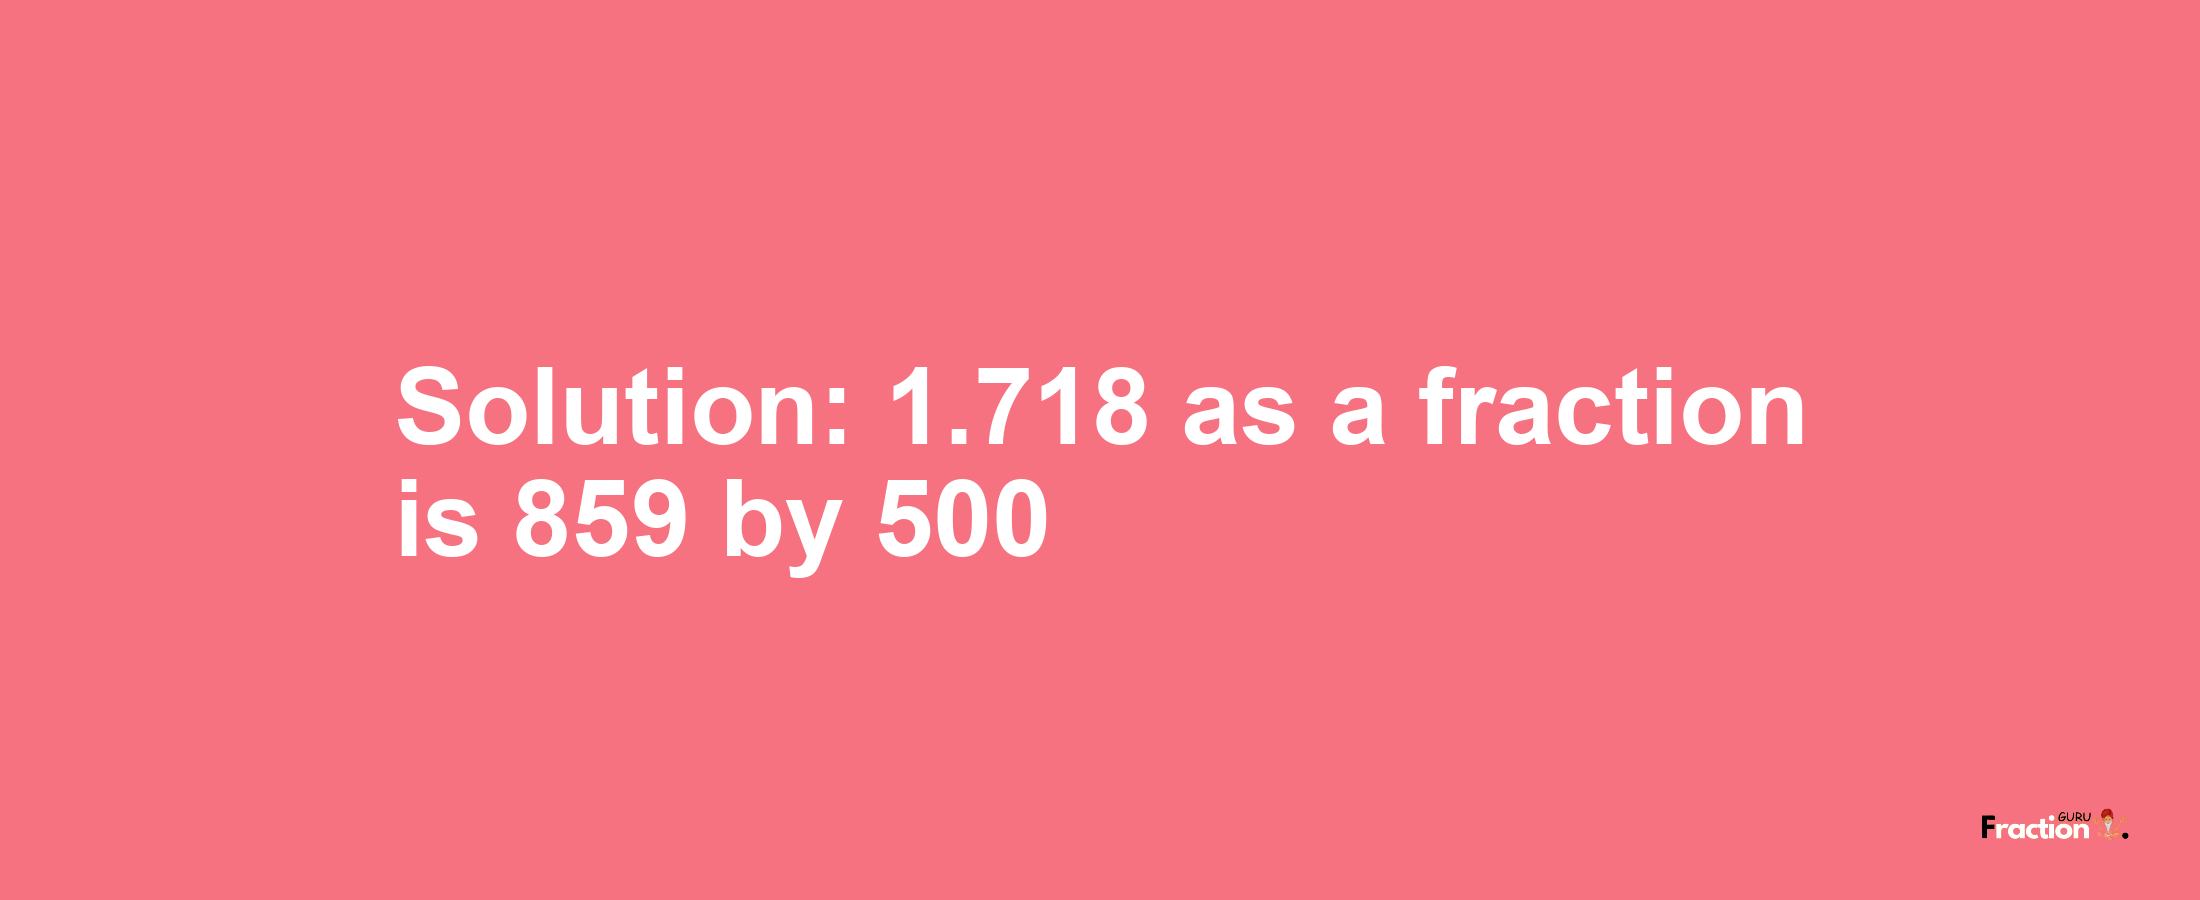 Solution:1.718 as a fraction is 859/500